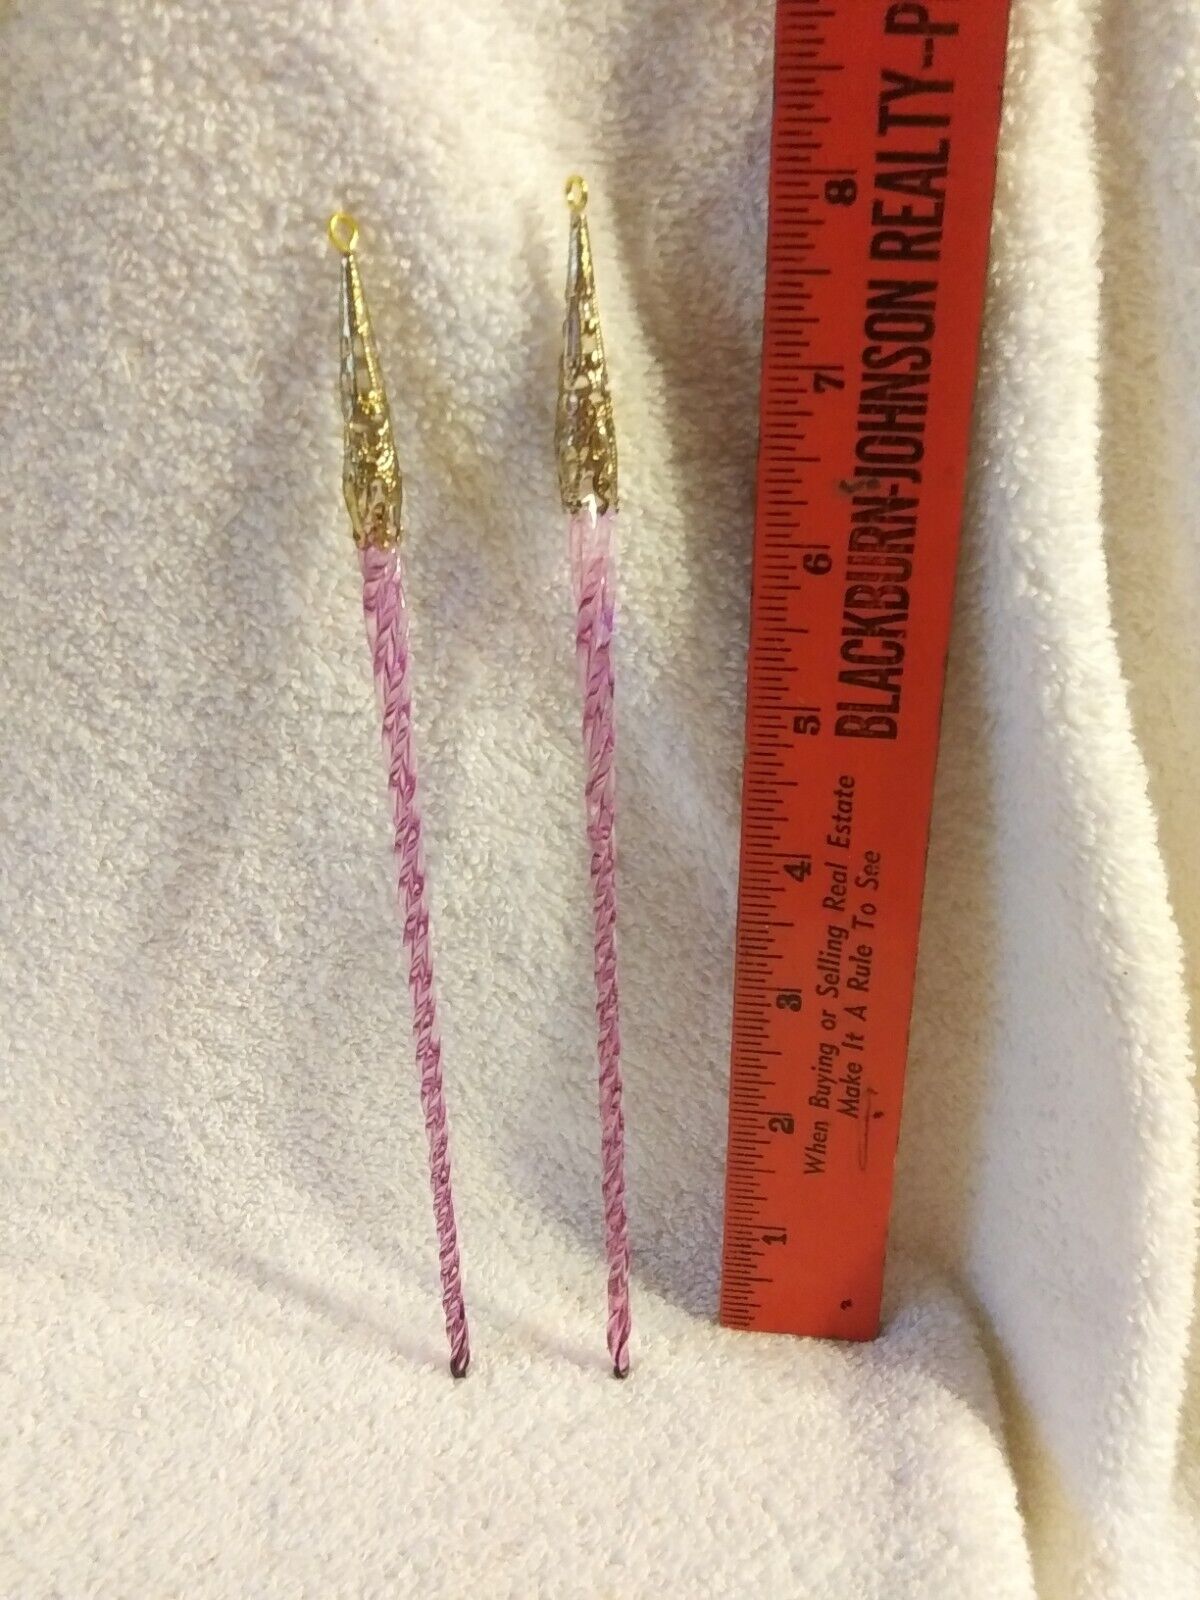  2 Silvestri Twisted Glass Icicle Ornaments Purple & Gold Filigree Tops 8.5